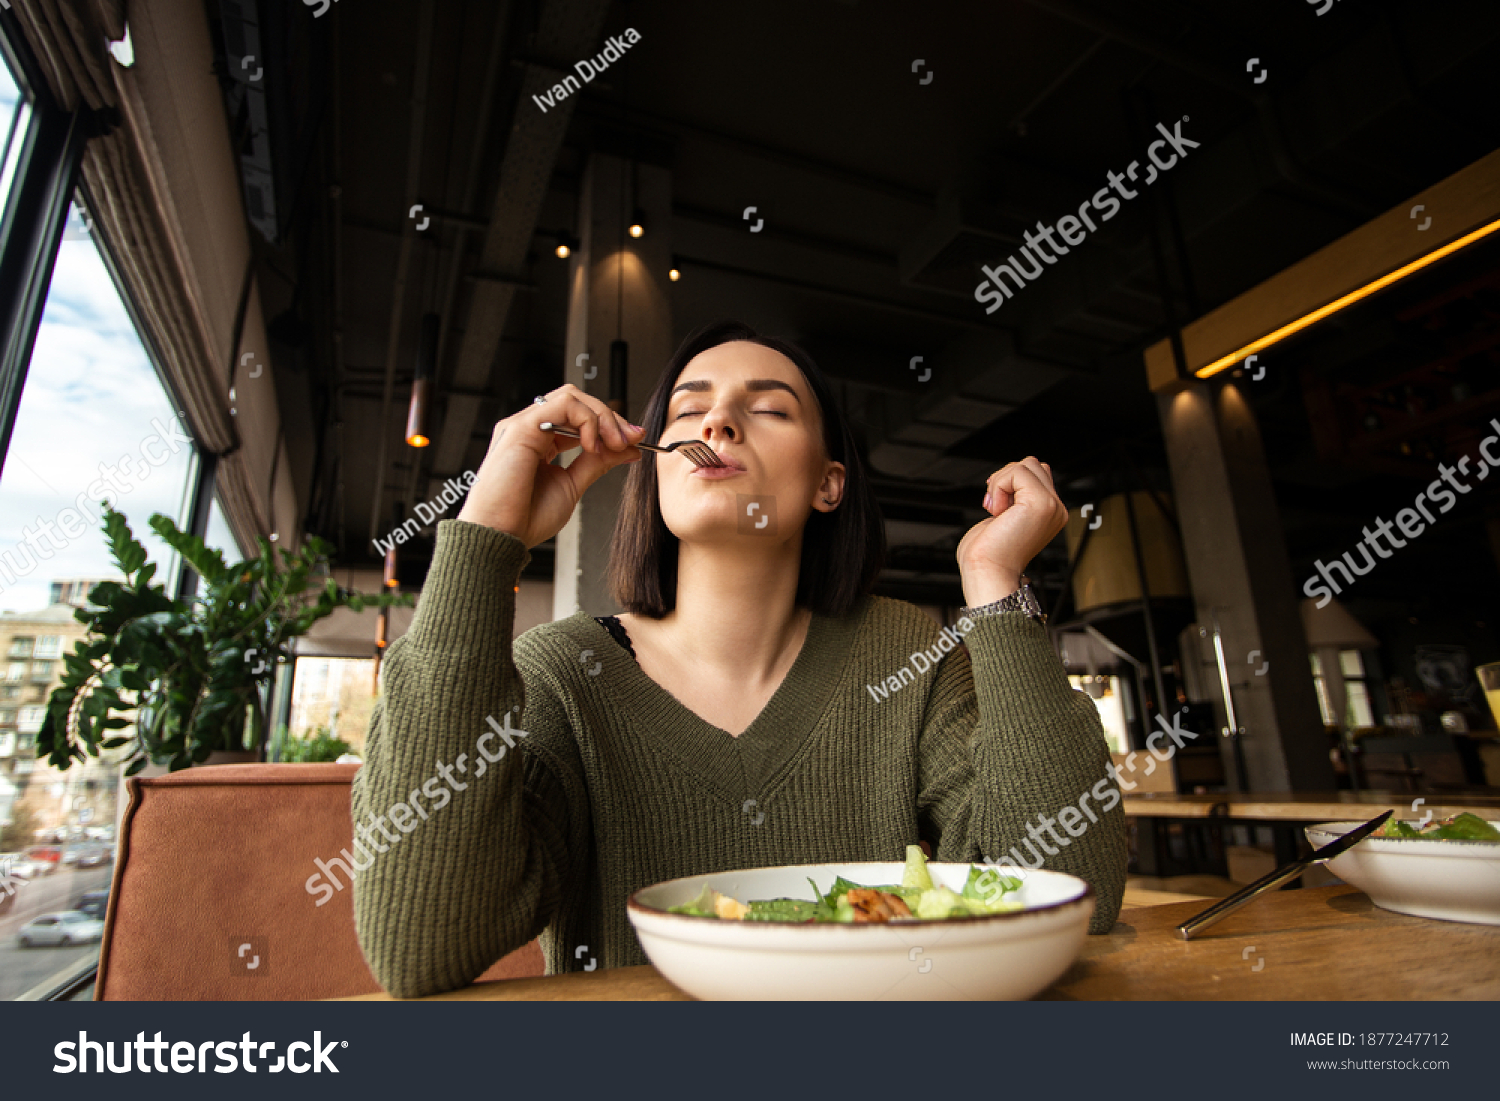 Satisfied young woman enjoys tasty salad in a restaurant, putting fork into her mouth and closing her eyes. Good customer service. Healthy diet concept. Weight loss without struggle. #1877247712